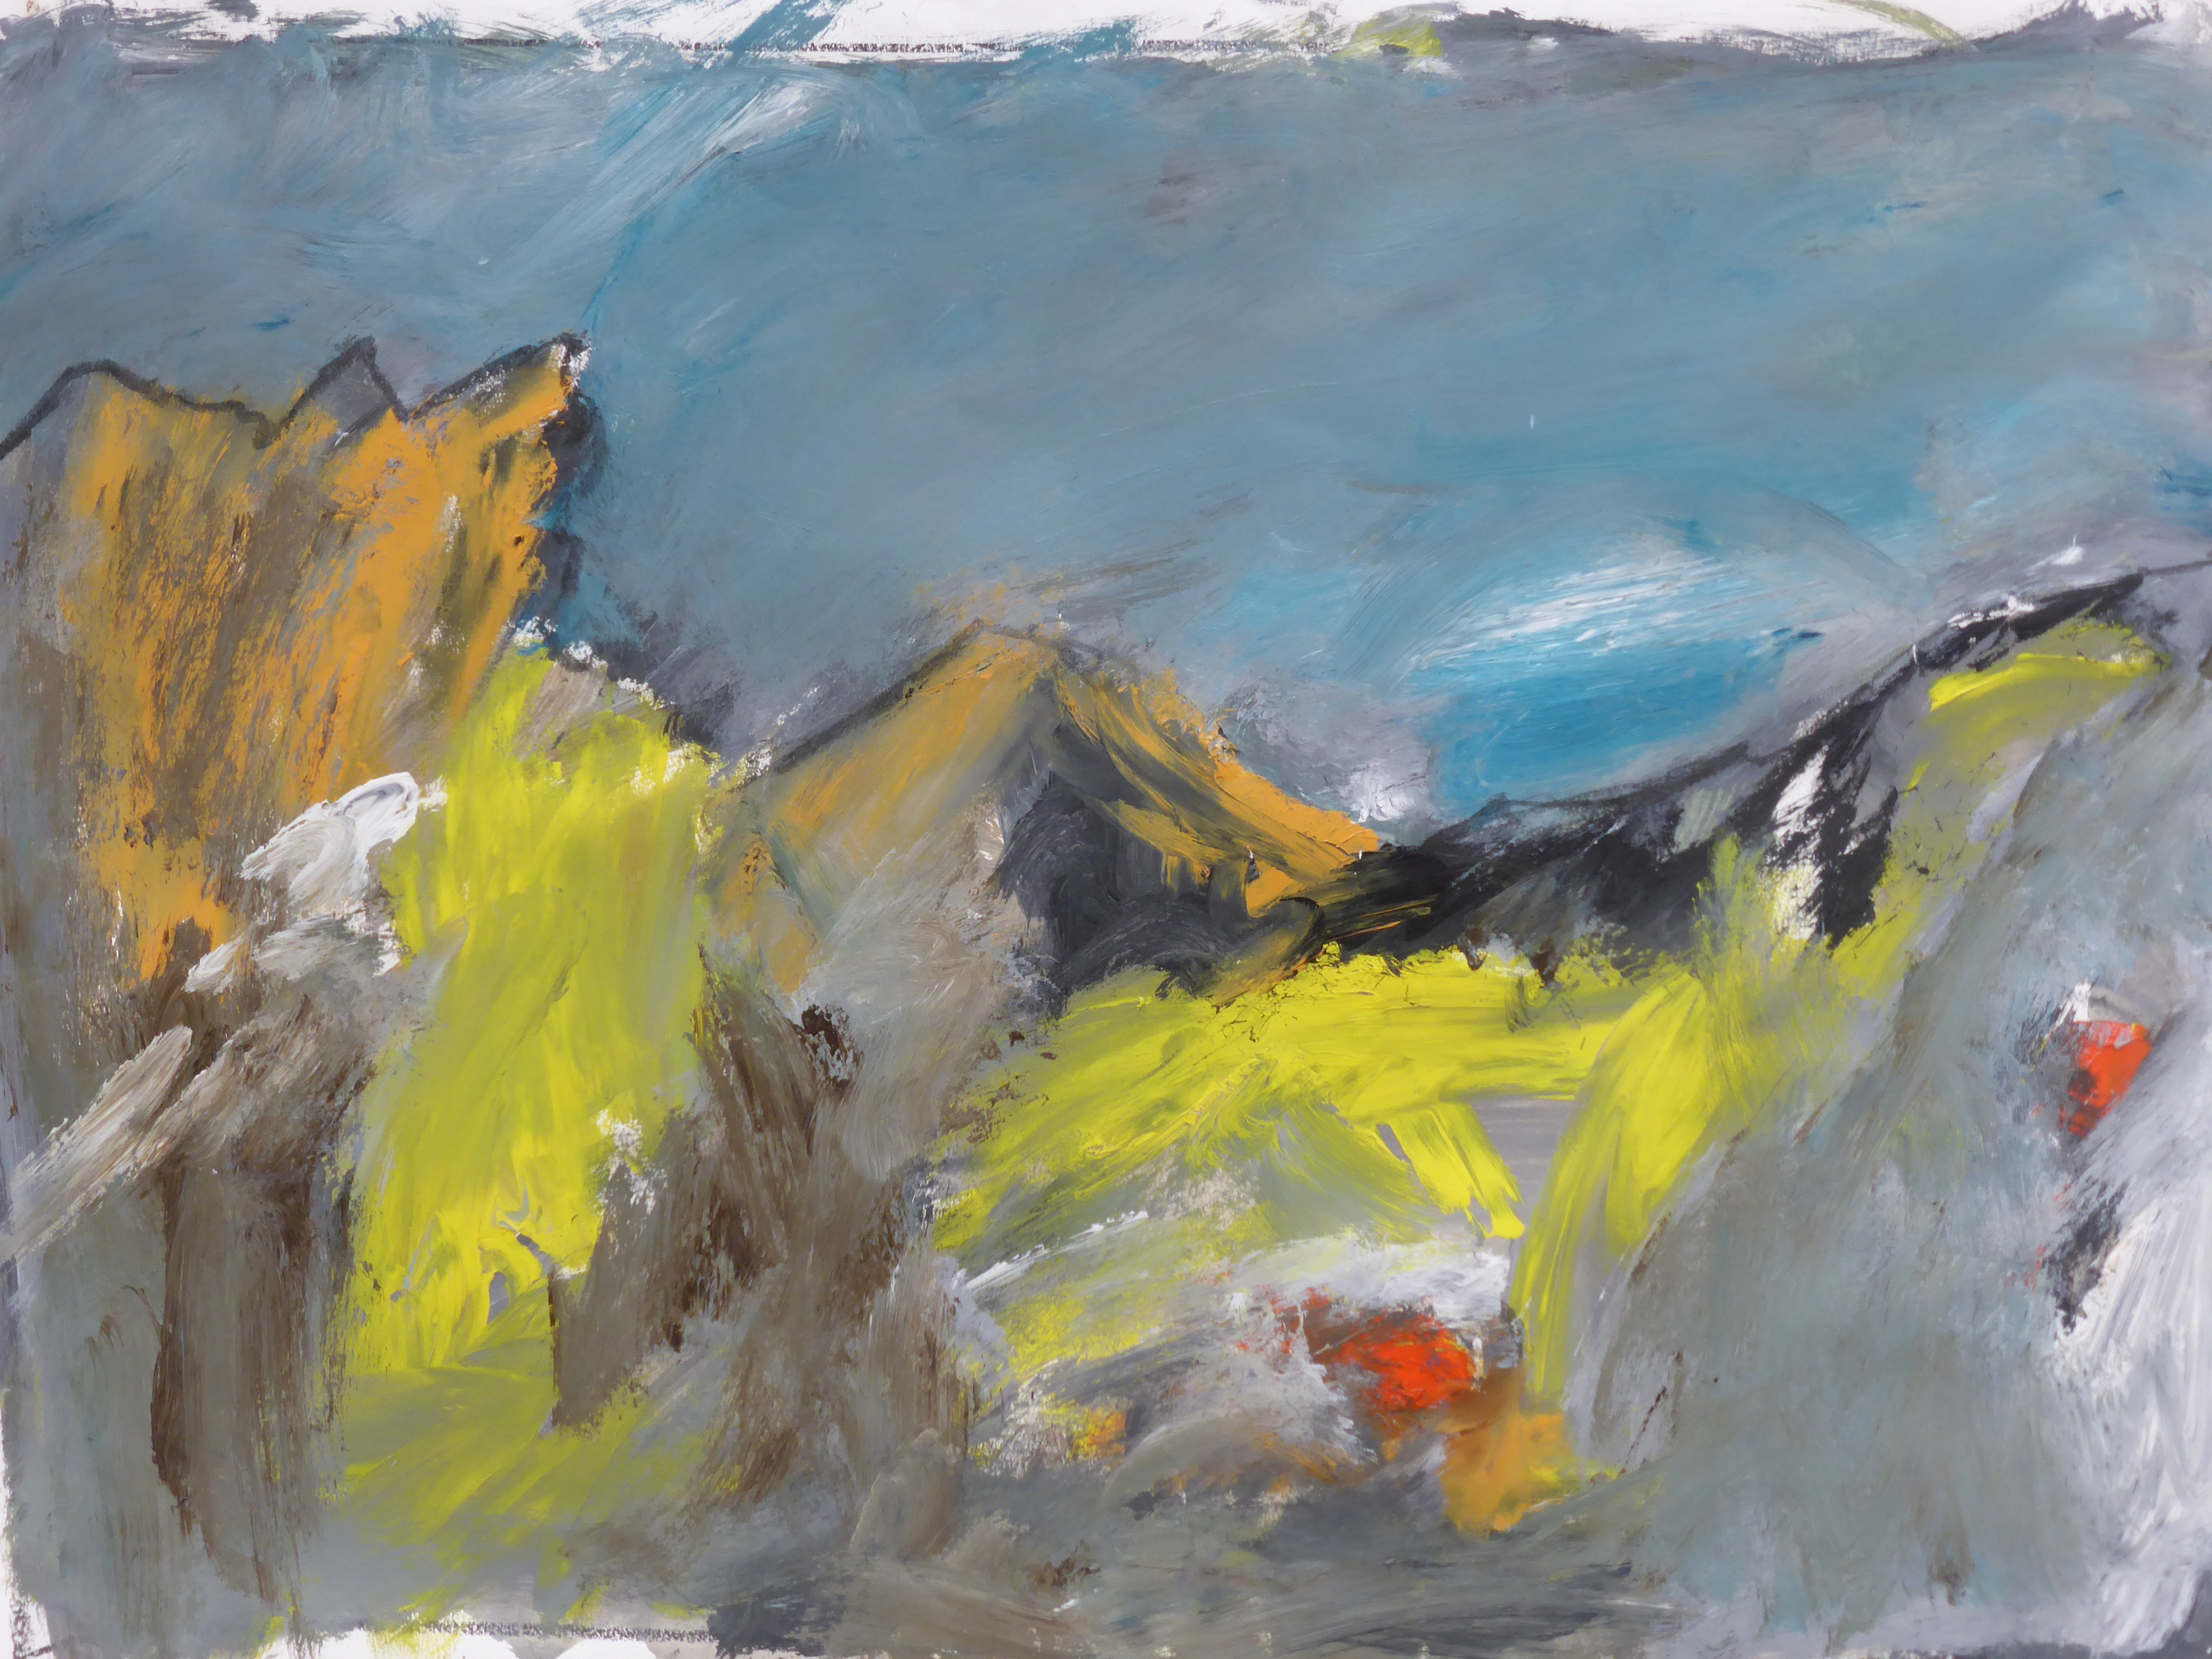 Overlooking Porthcurno with Gorse, Mixed Media on Paper, 43 x 63cm